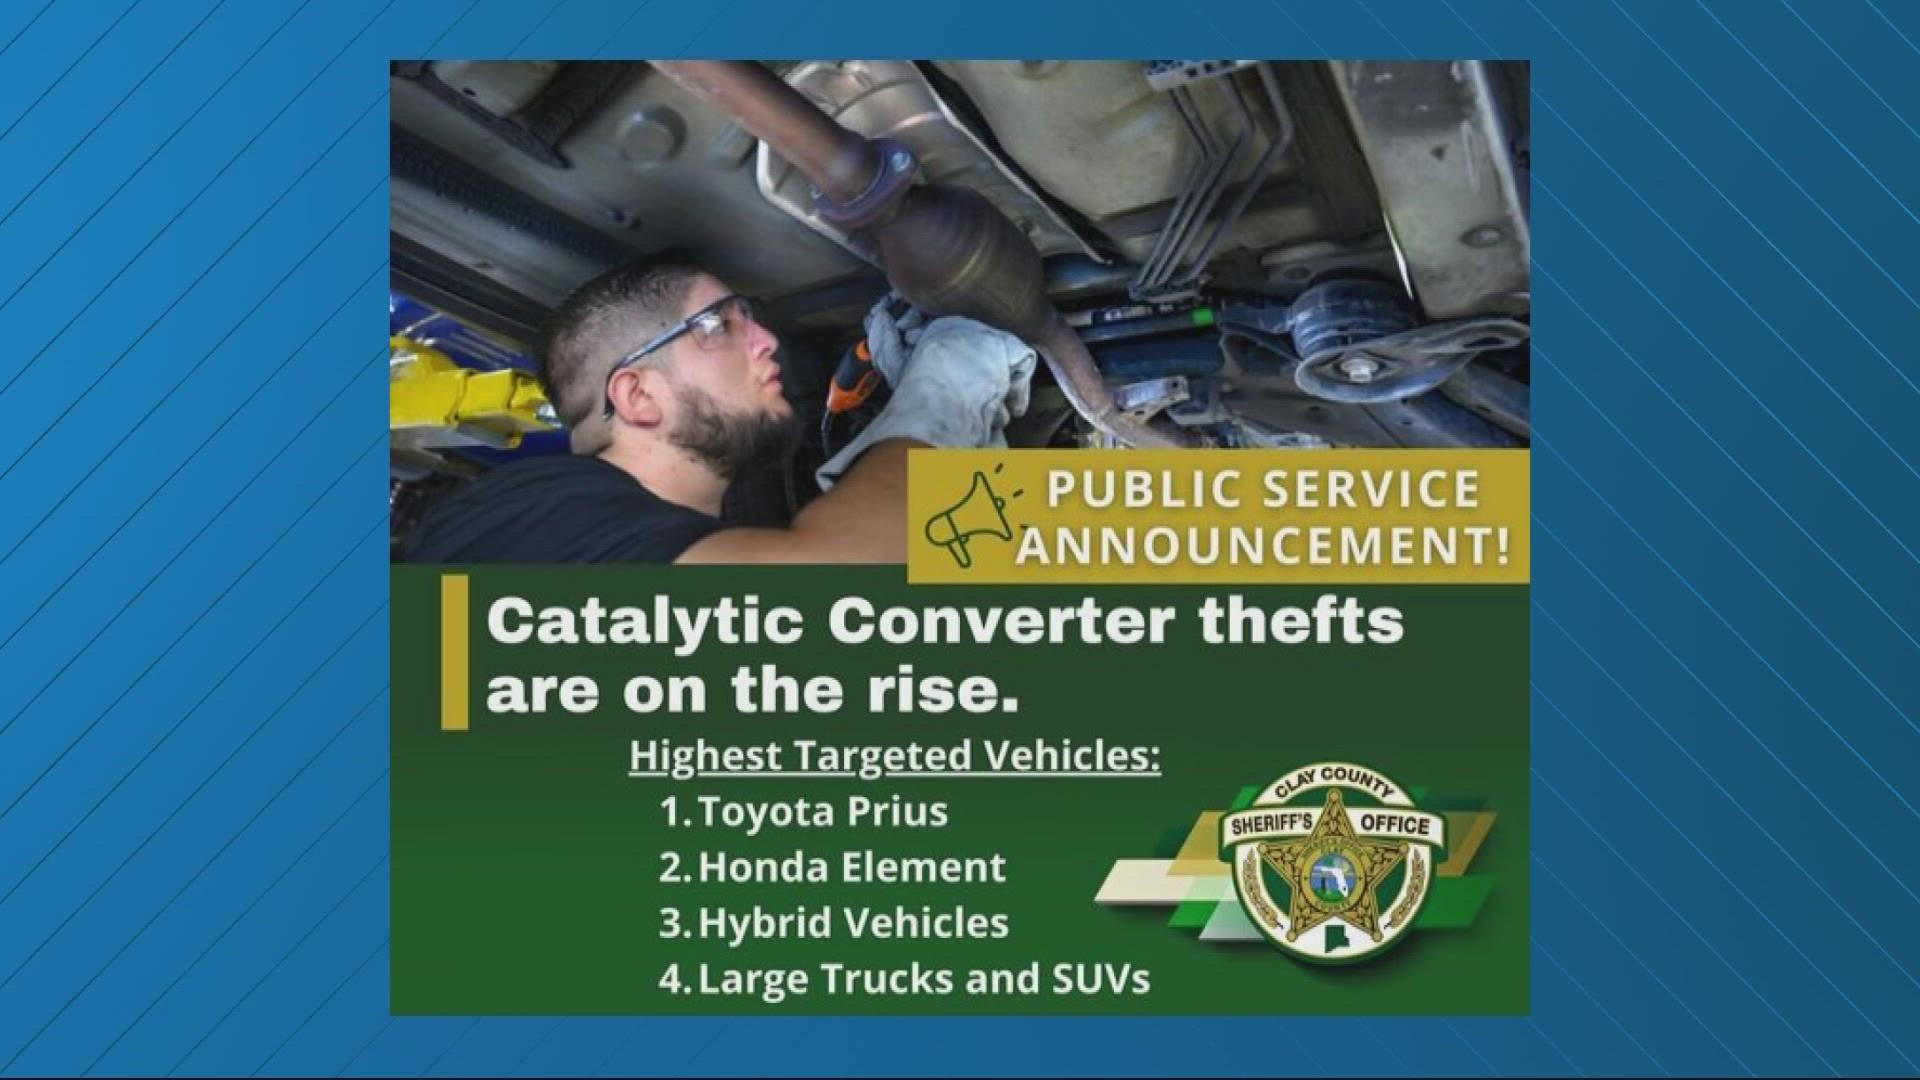 Clay County Sheriff's Office is warning residents which cars are being targeted.